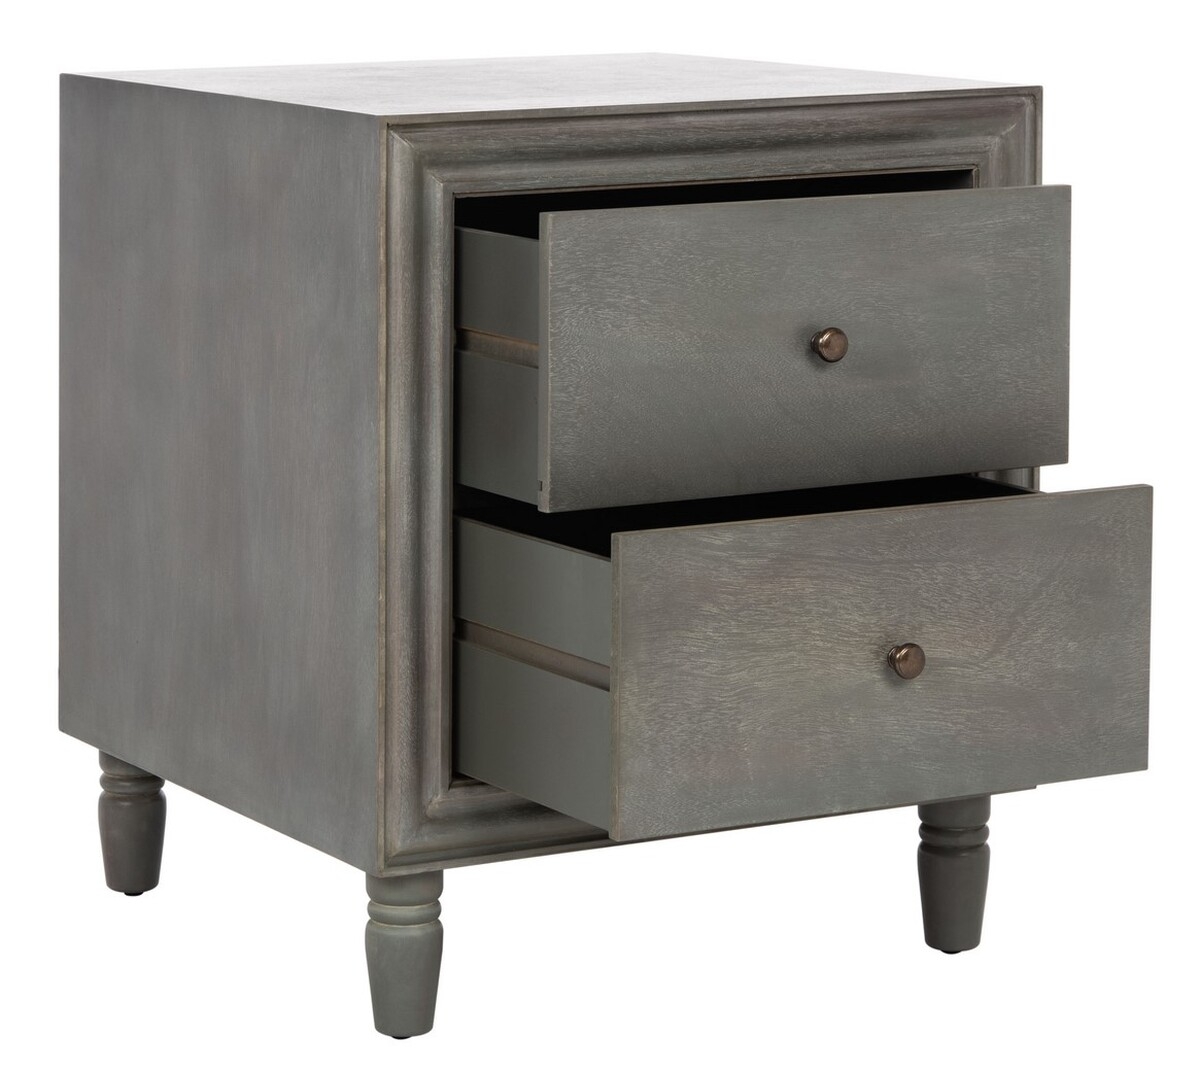 Blaise Nightstand With Storage Drawers - French Grey - Arlo Home - Image 2